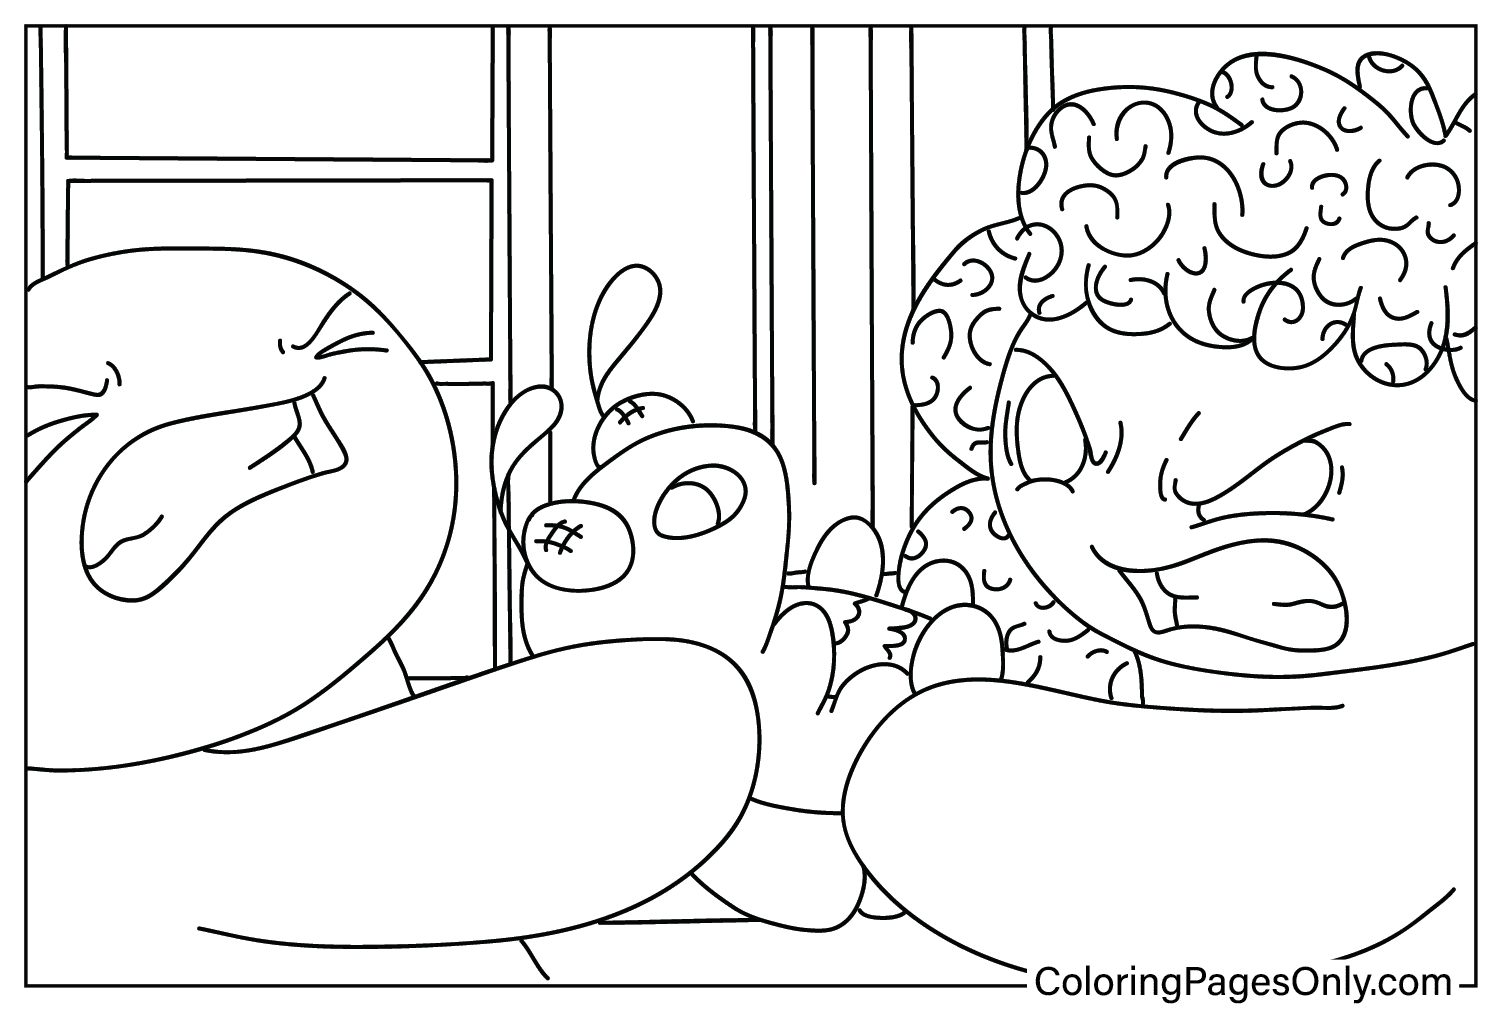 TheOdd1sOut Coloring Page Free from TheOdd1sOut